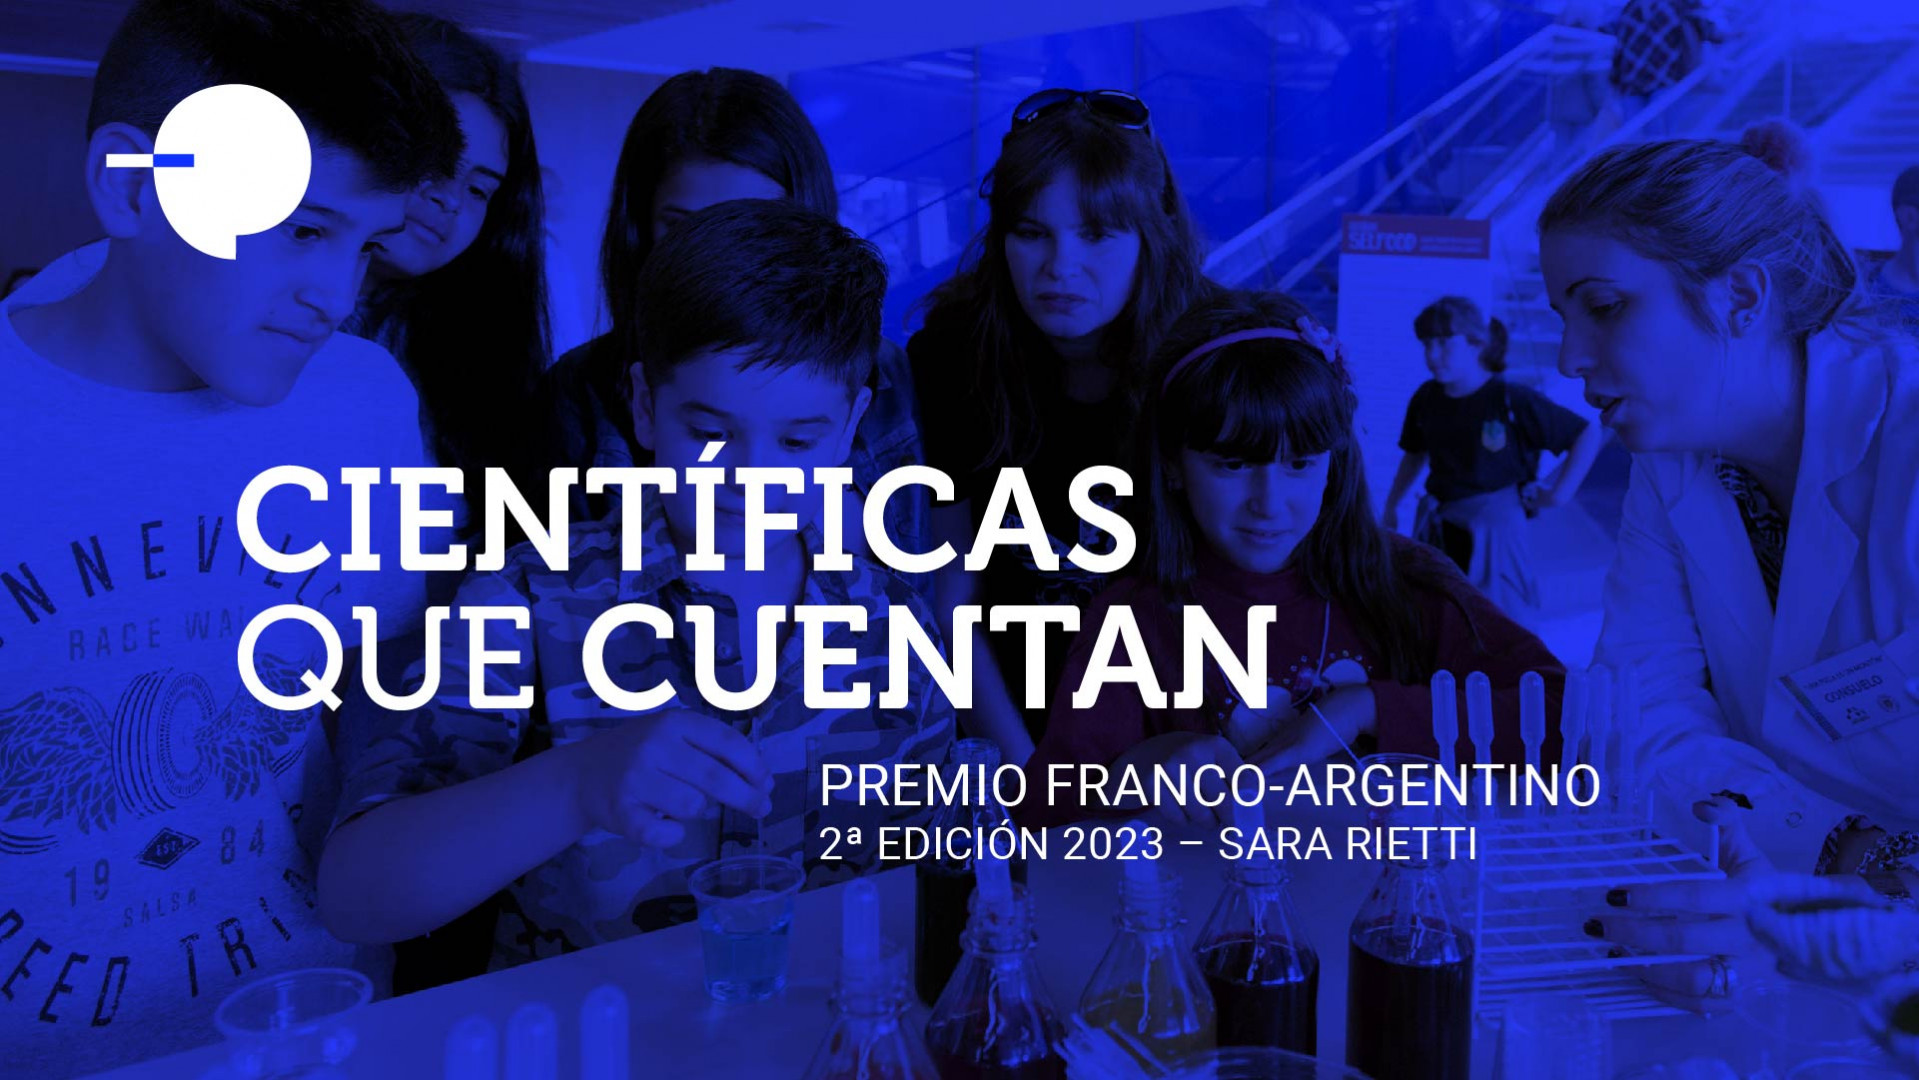 Launch of the second edition of the “Científicas Que Cuentan” award